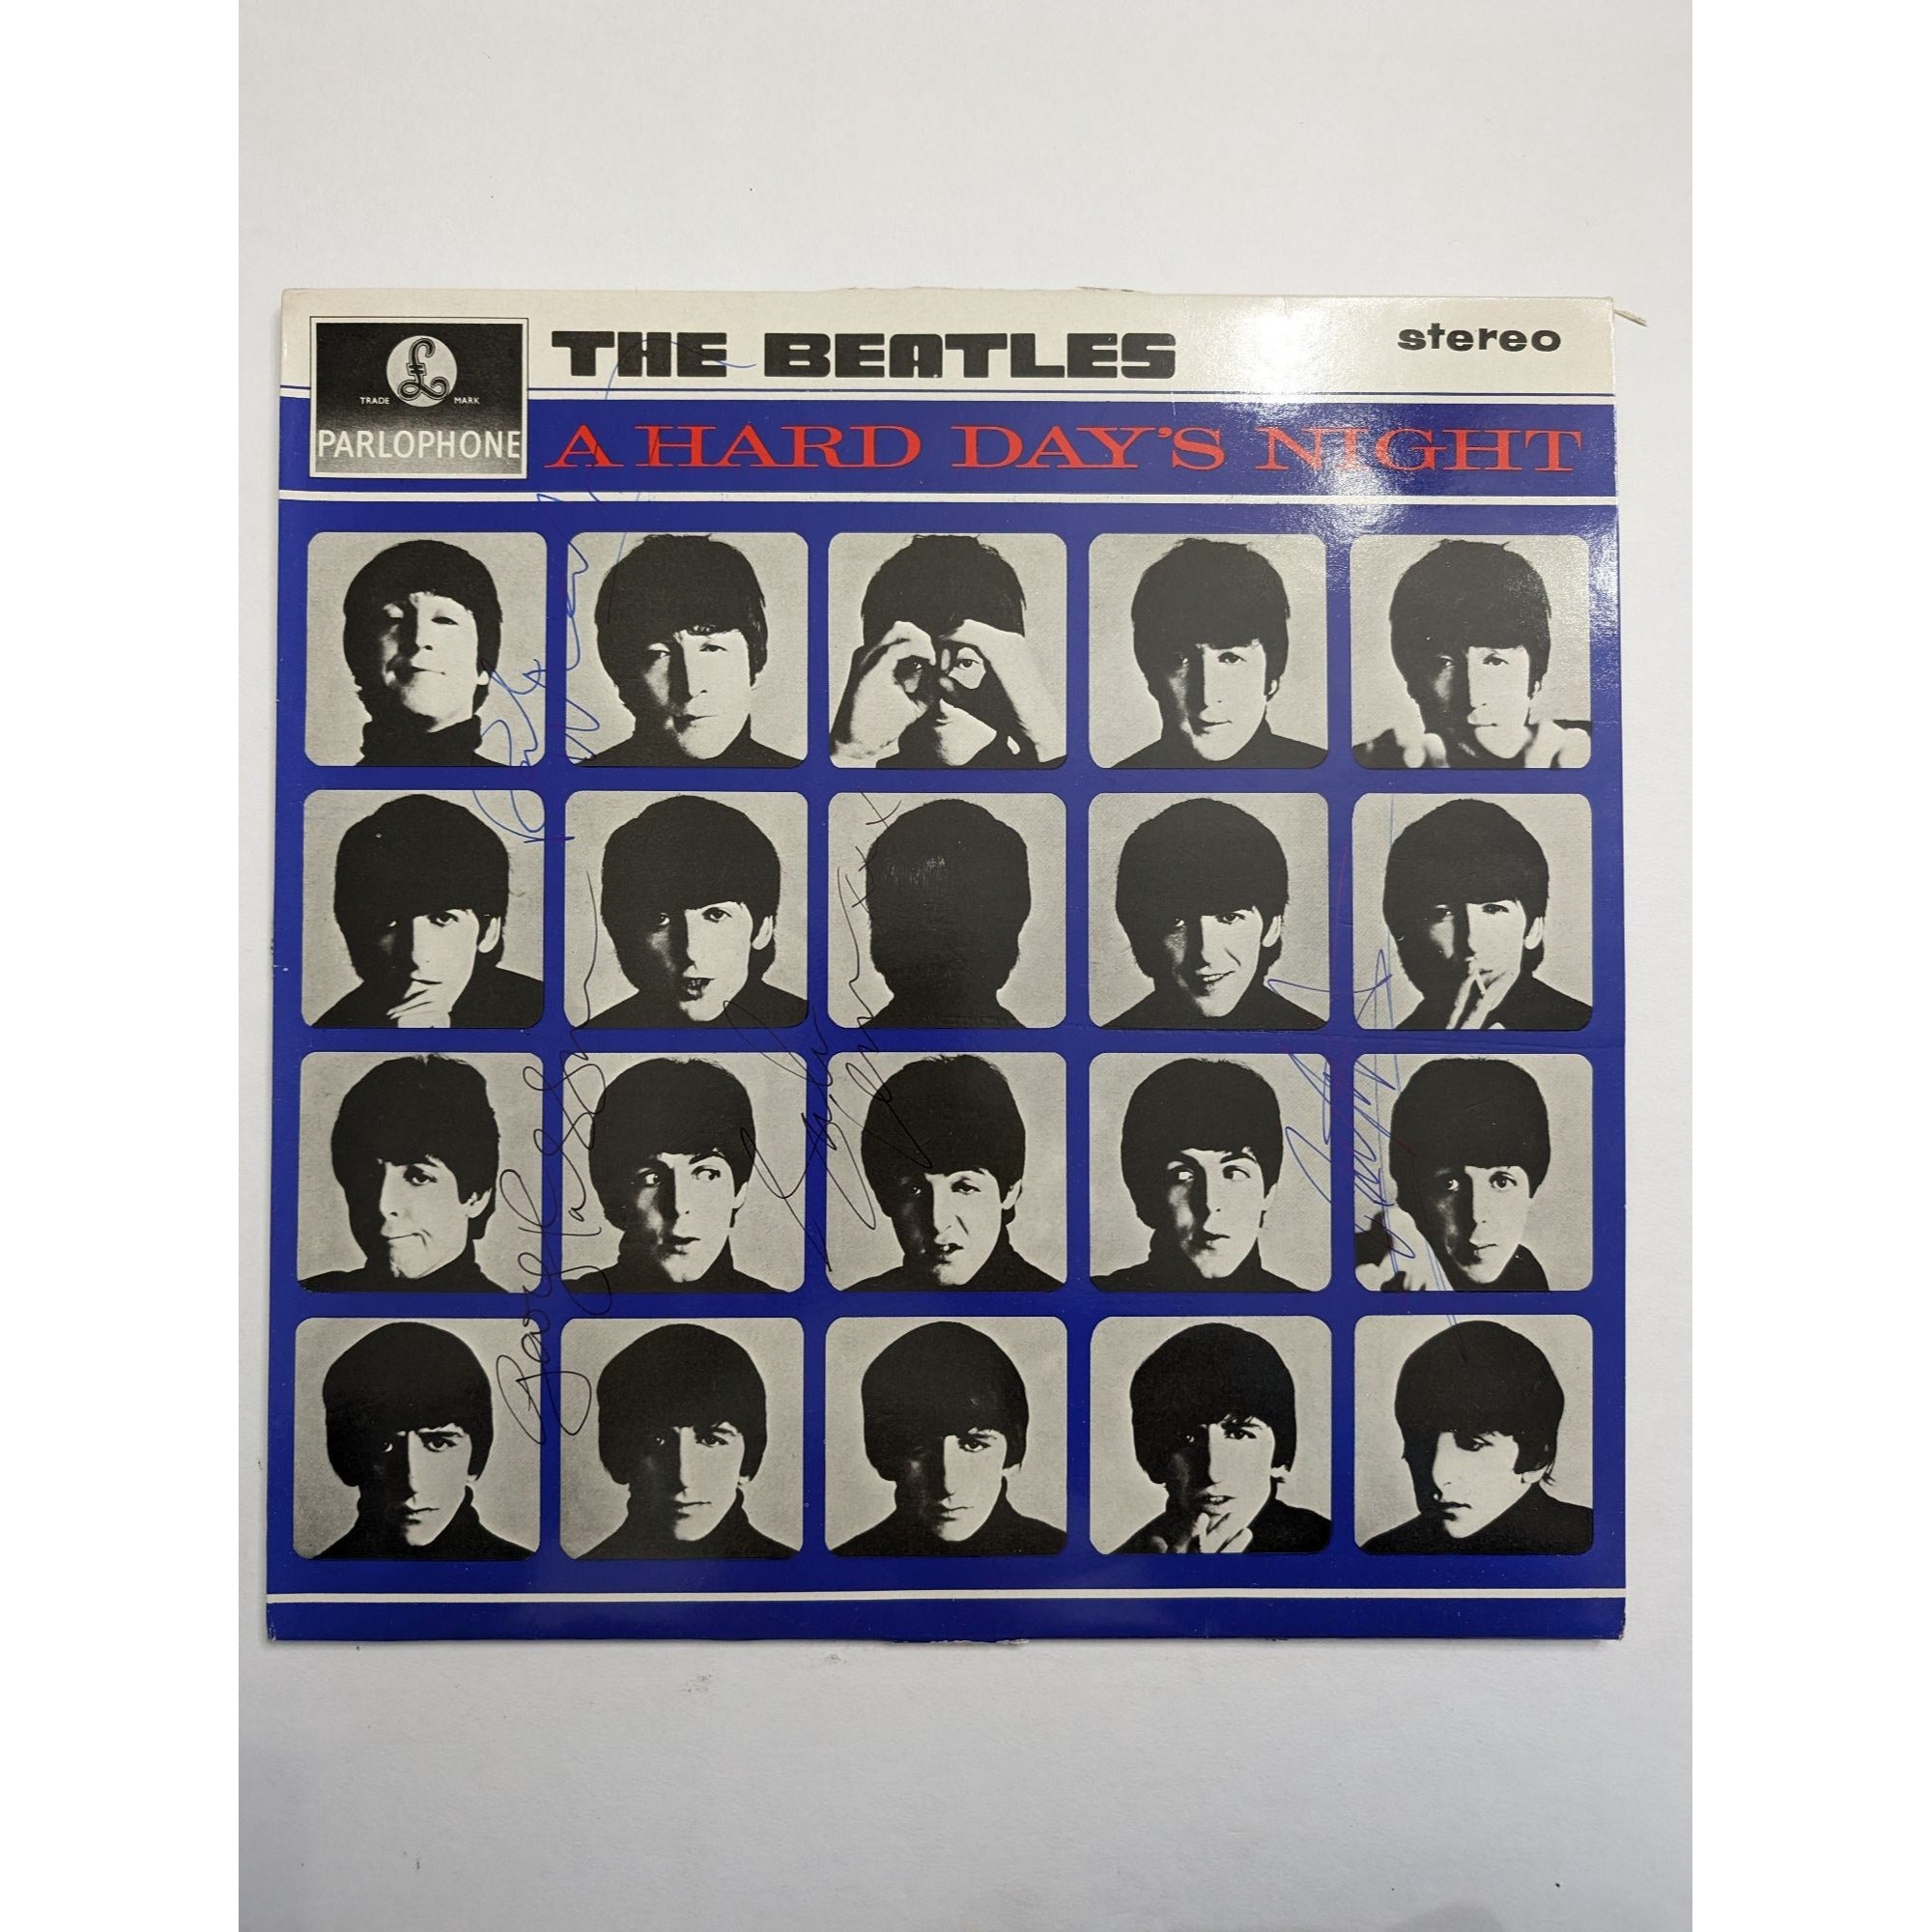 The Beatles A Hard Day's Night original UK Edition signed by John Lennon Paul McCartney running a star and George Harrison